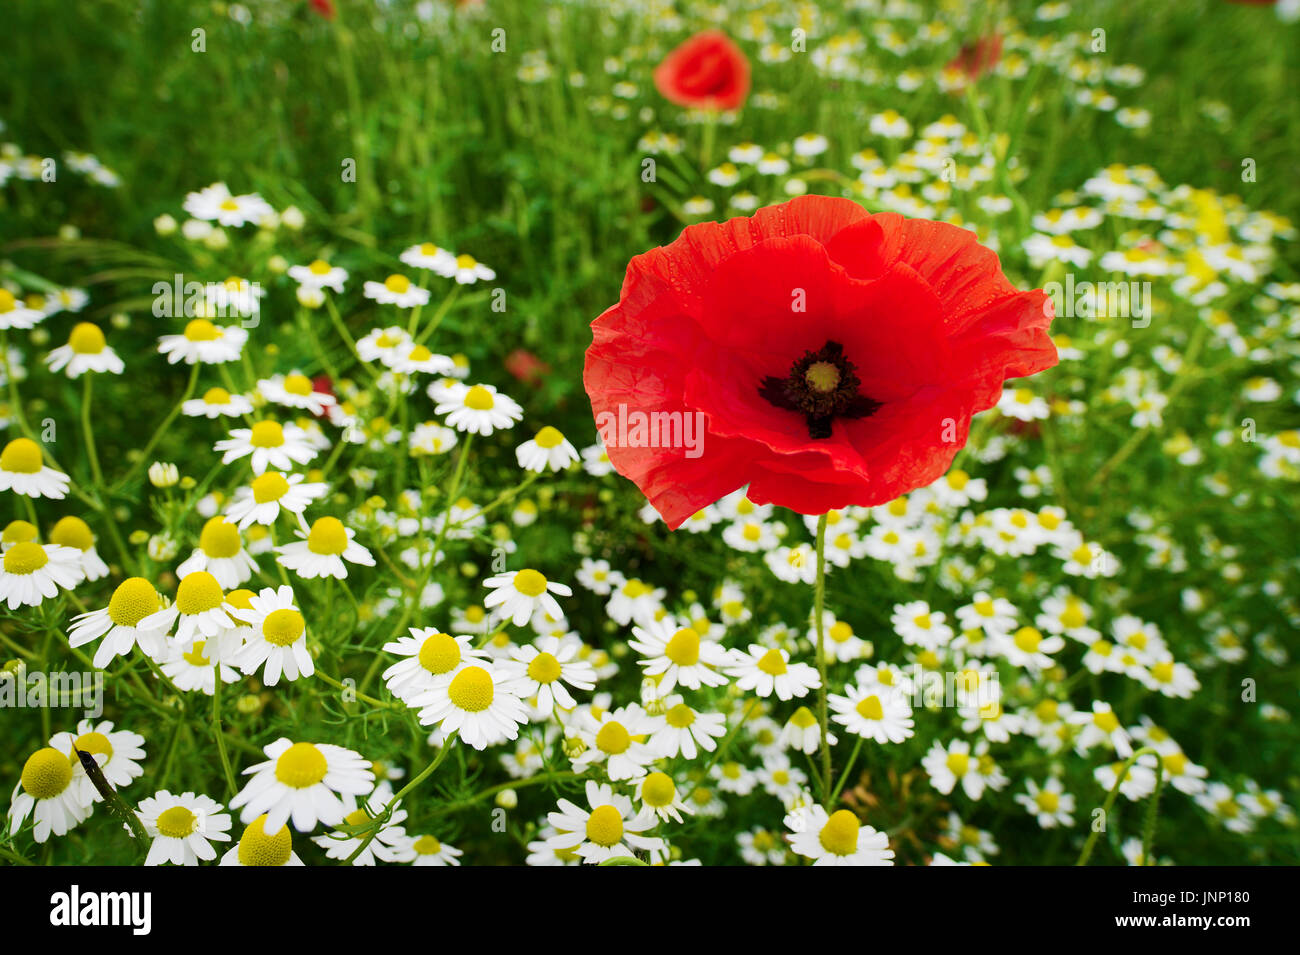 Red corn poppy papaver and chamomile flowers growing on colorful meadow in countryside. Spring field in blossom. Stegna, Pomerania, Poland. Stock Photo